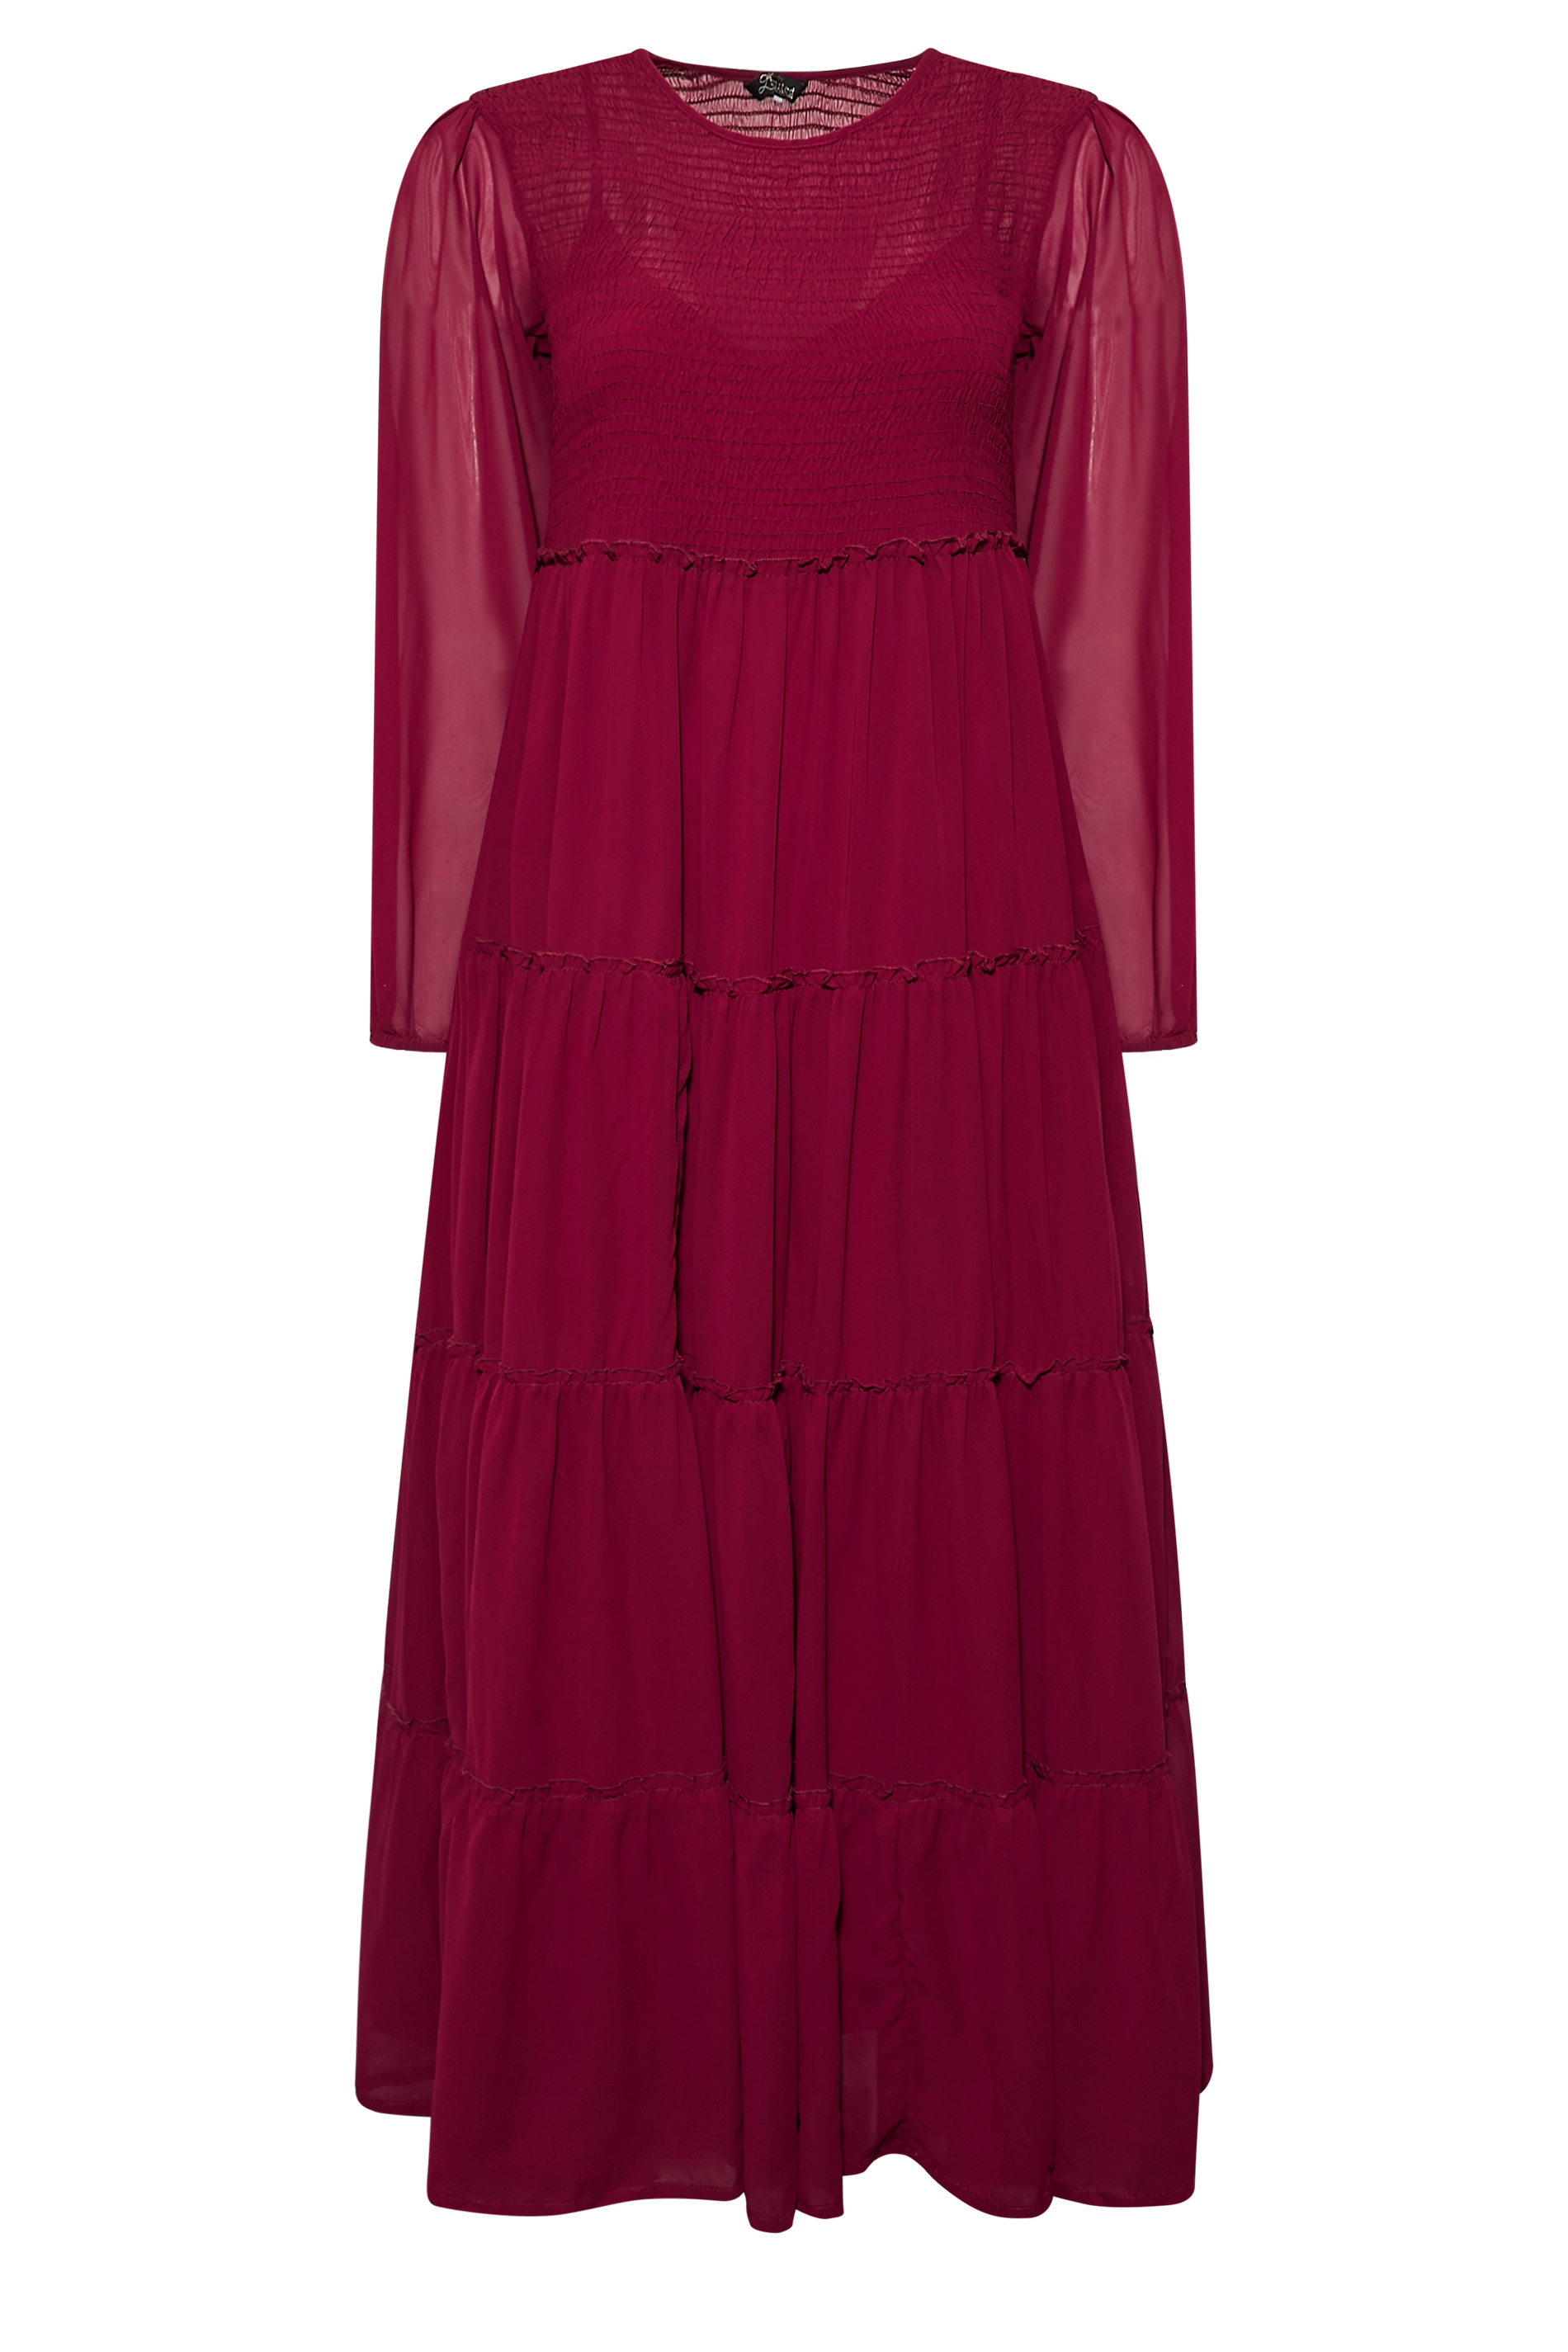 LIMITED COLLECTION Curve Burgundy Red Tierred Chiffon Dress | Yours ...